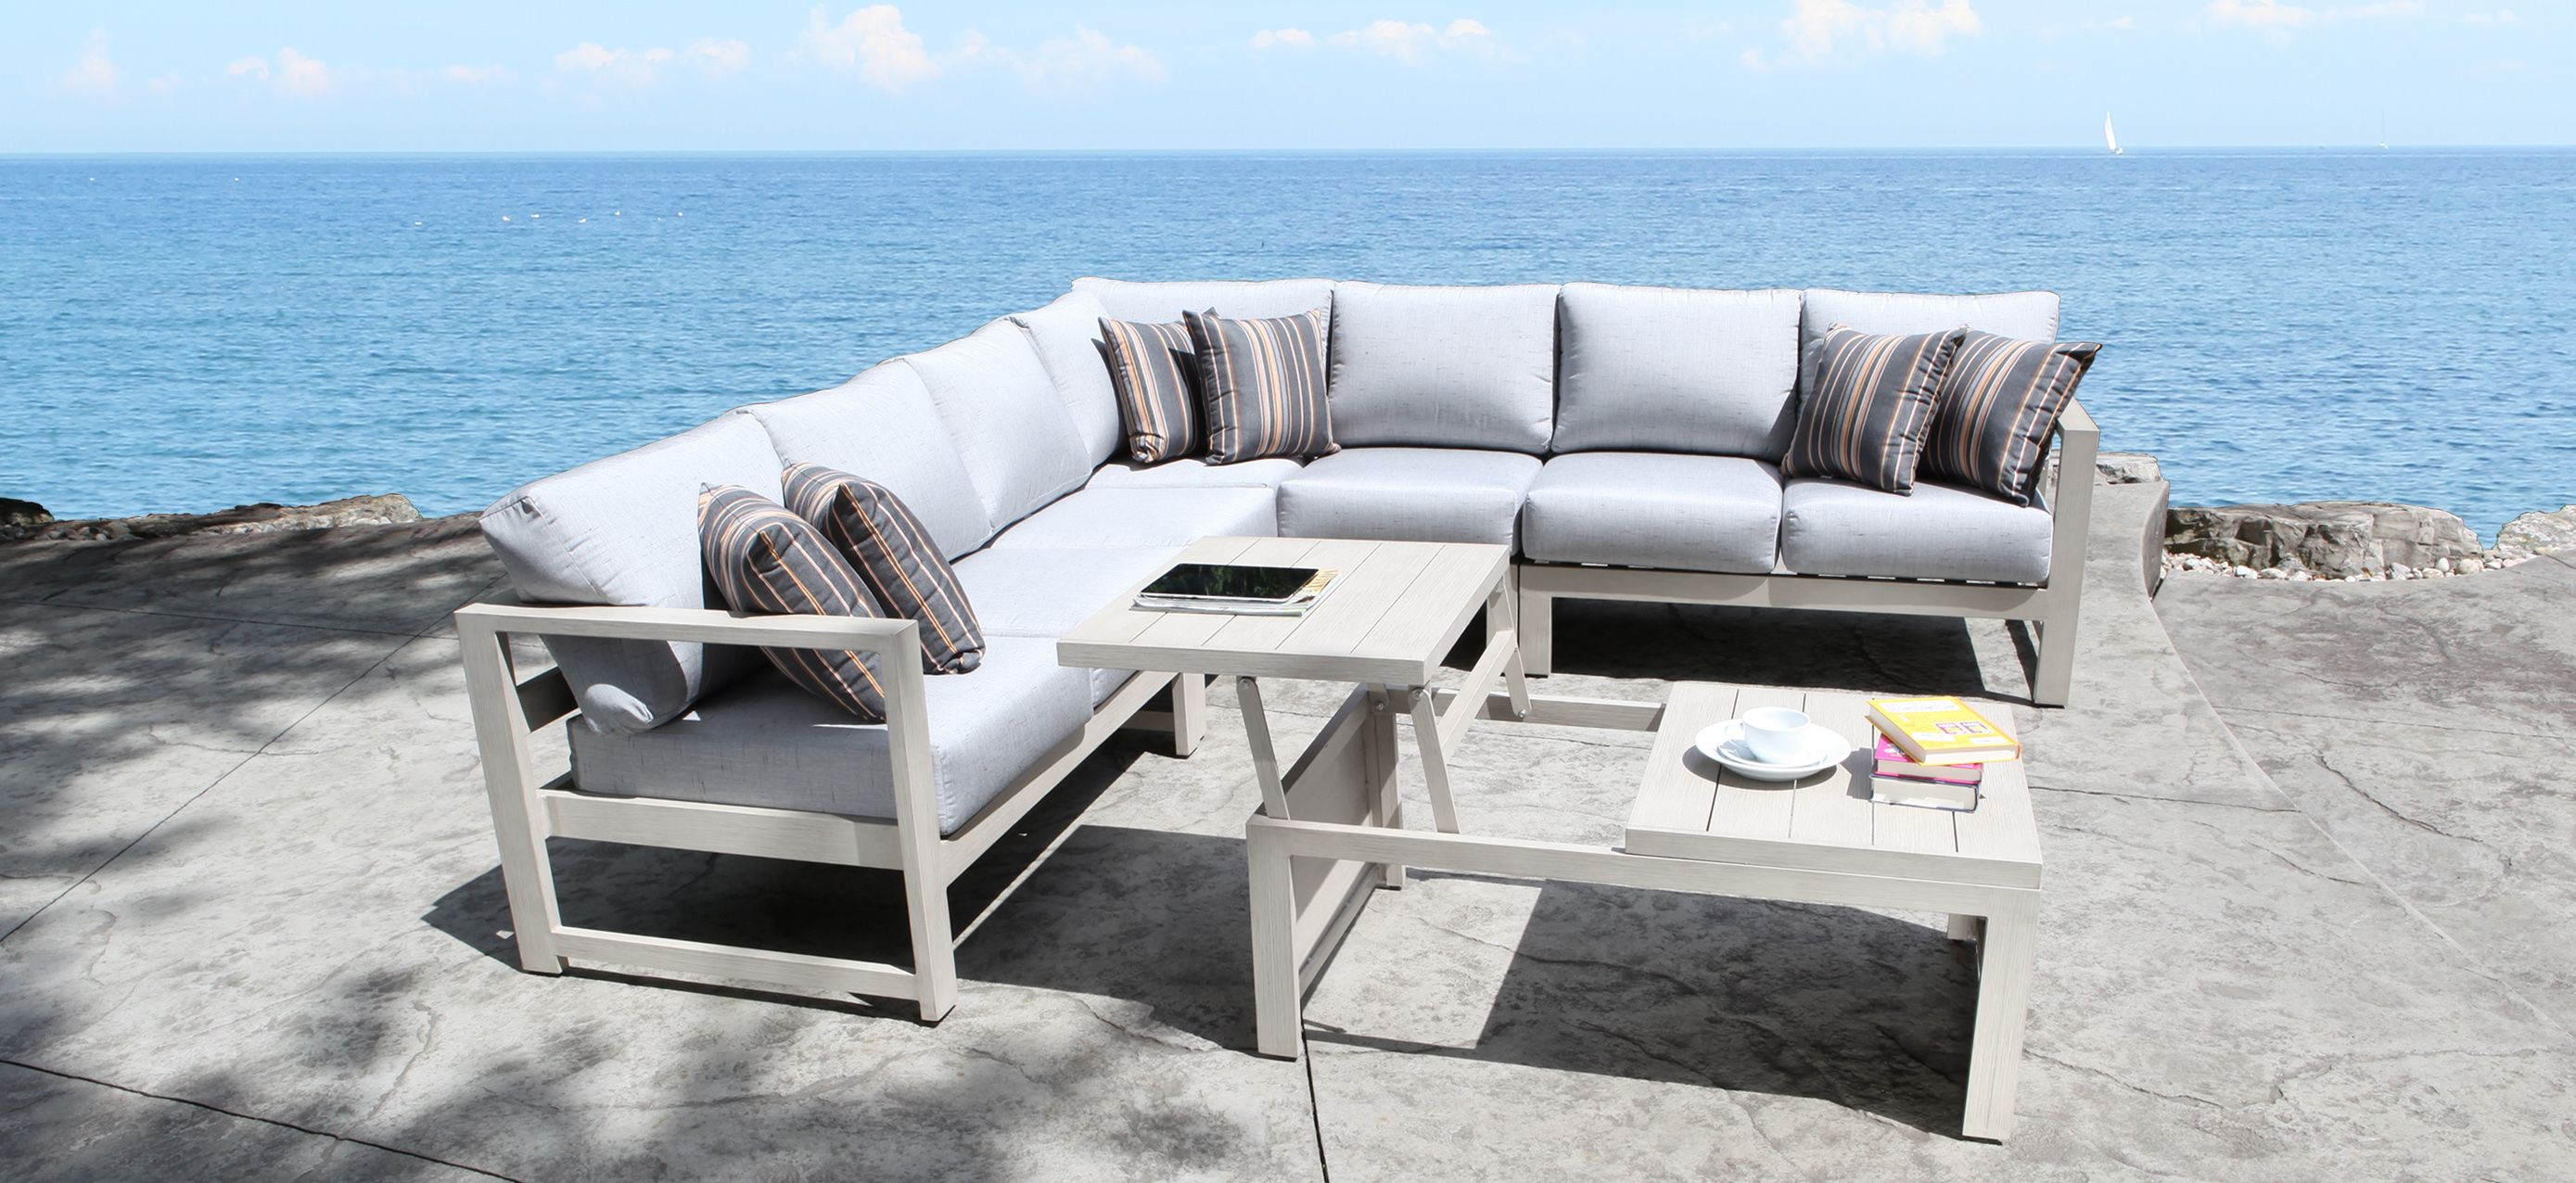 Cast Aluminum Patio Furniture Wynn Outdoor Sectional With in proportions 2778 X 1276